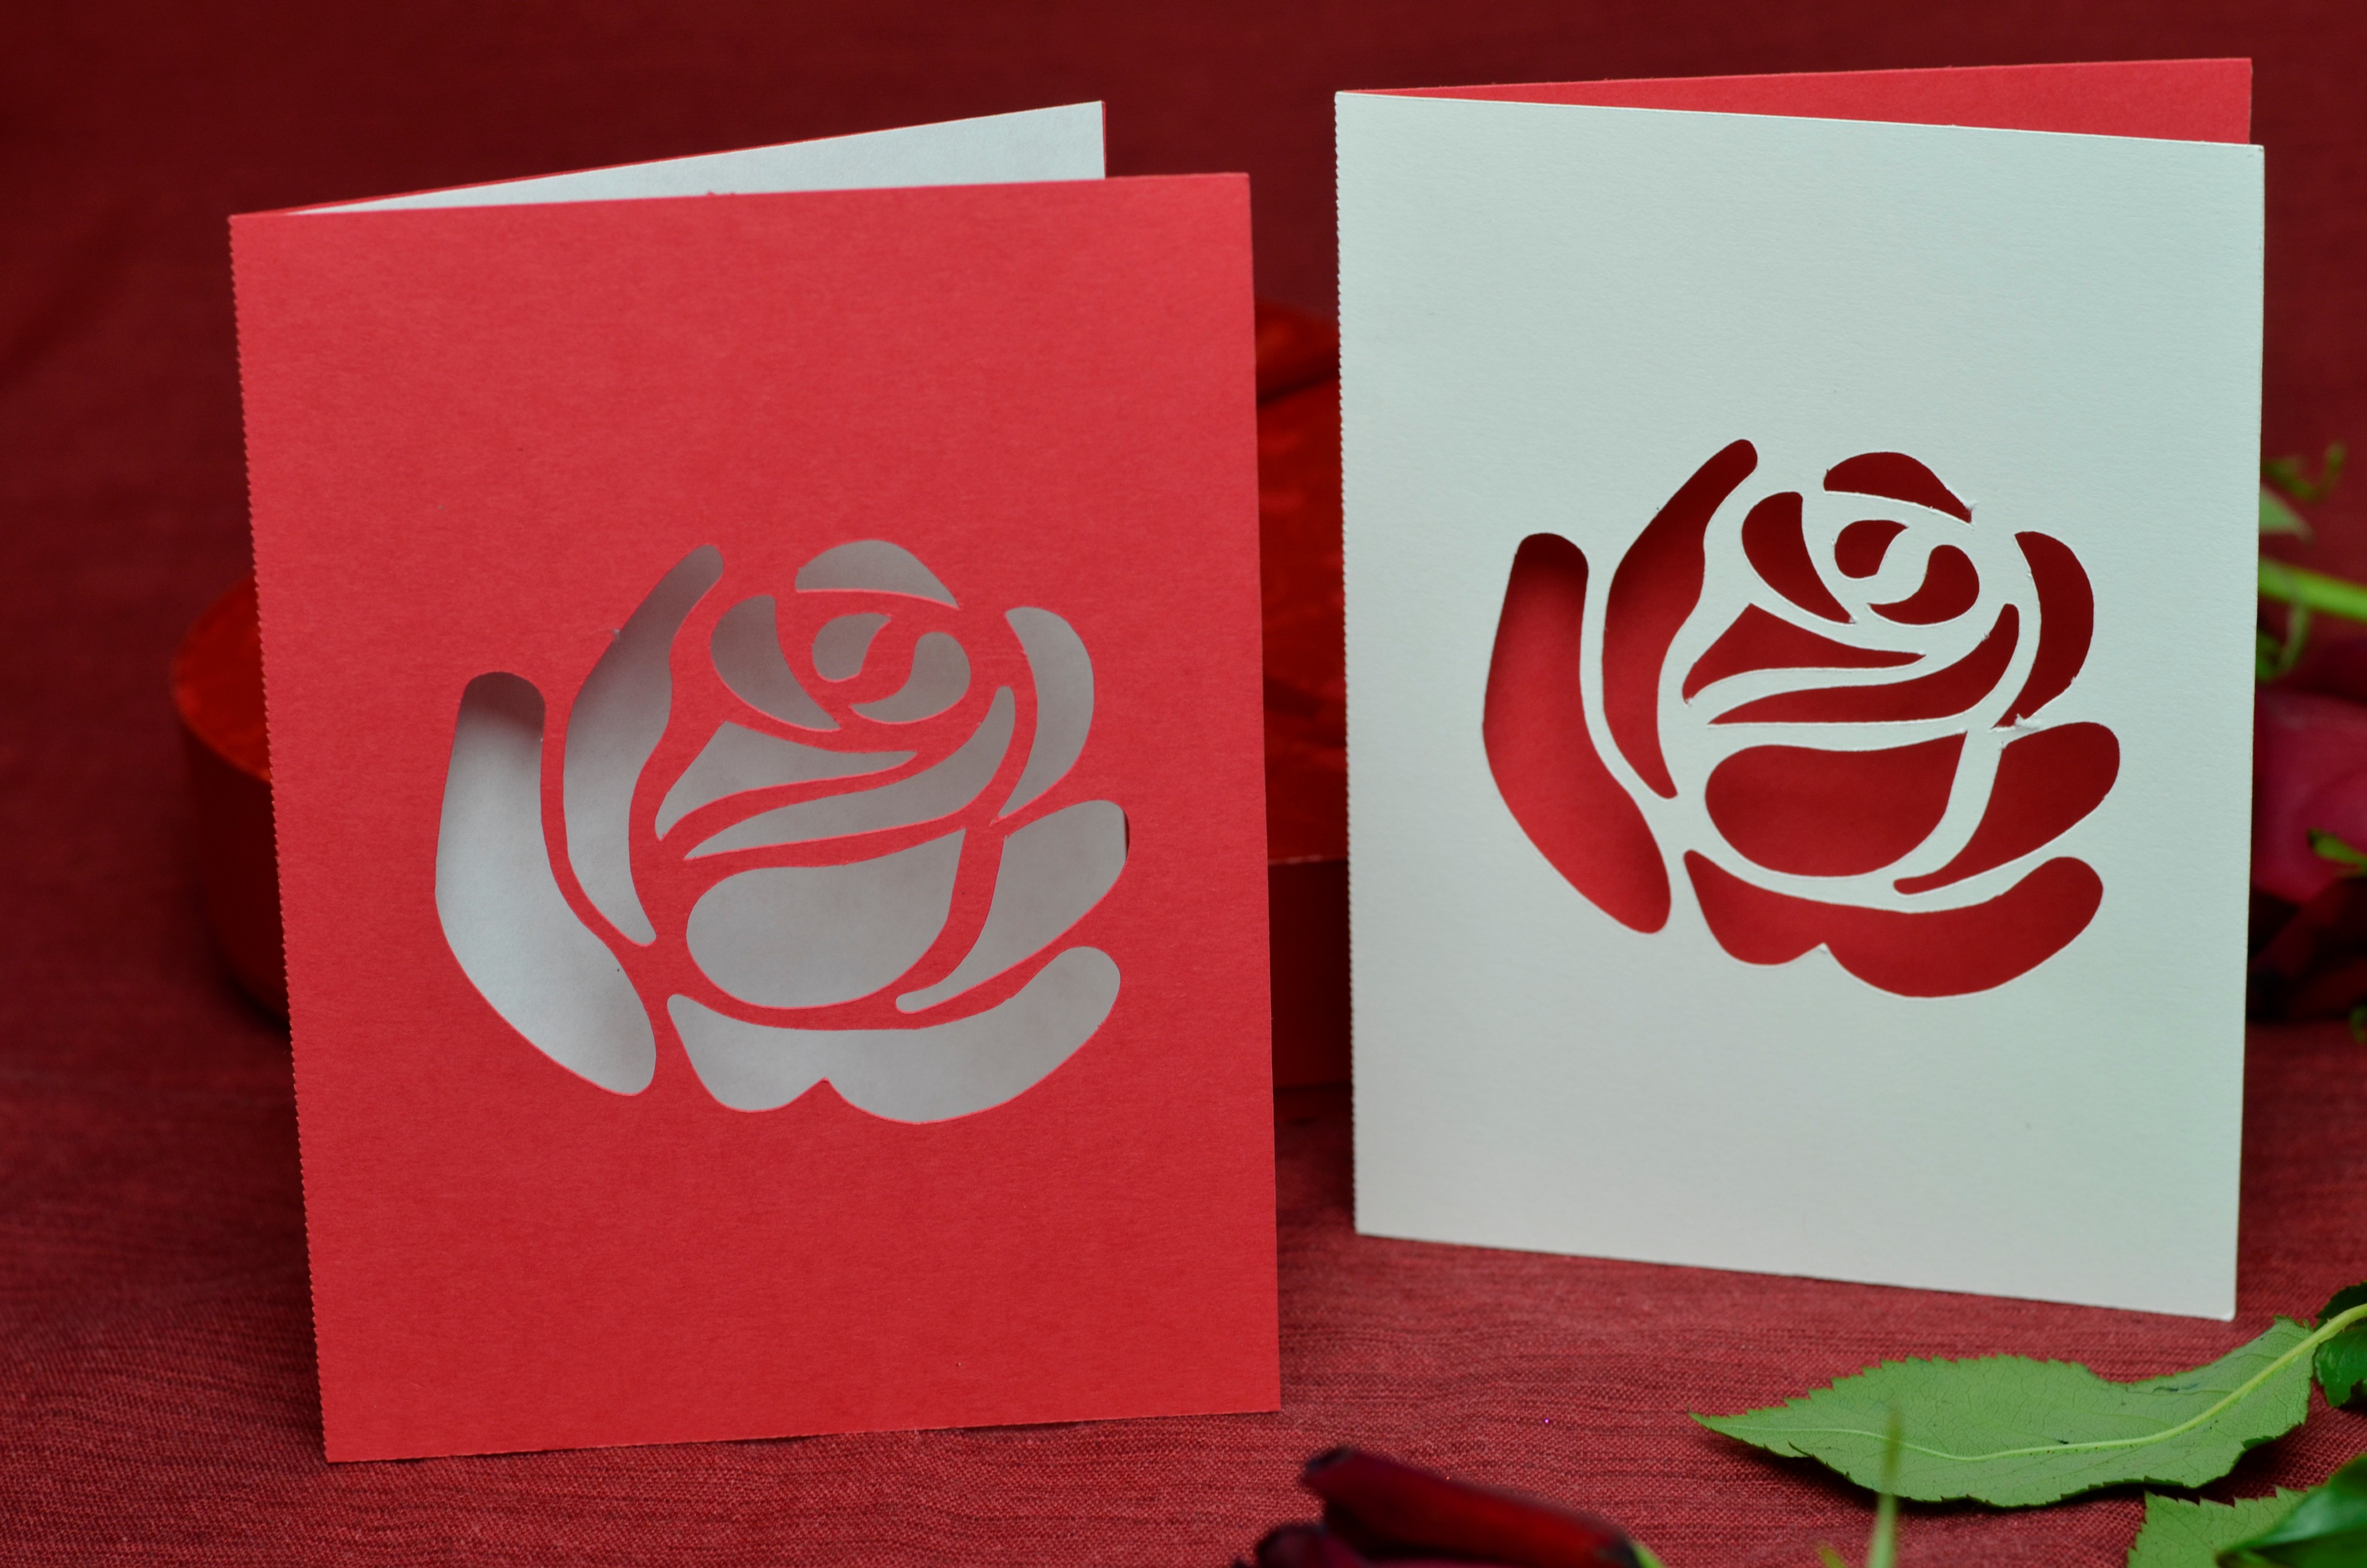 Top 10 Ideas for Valentine's Day Cards - Creative Pop Up Cards